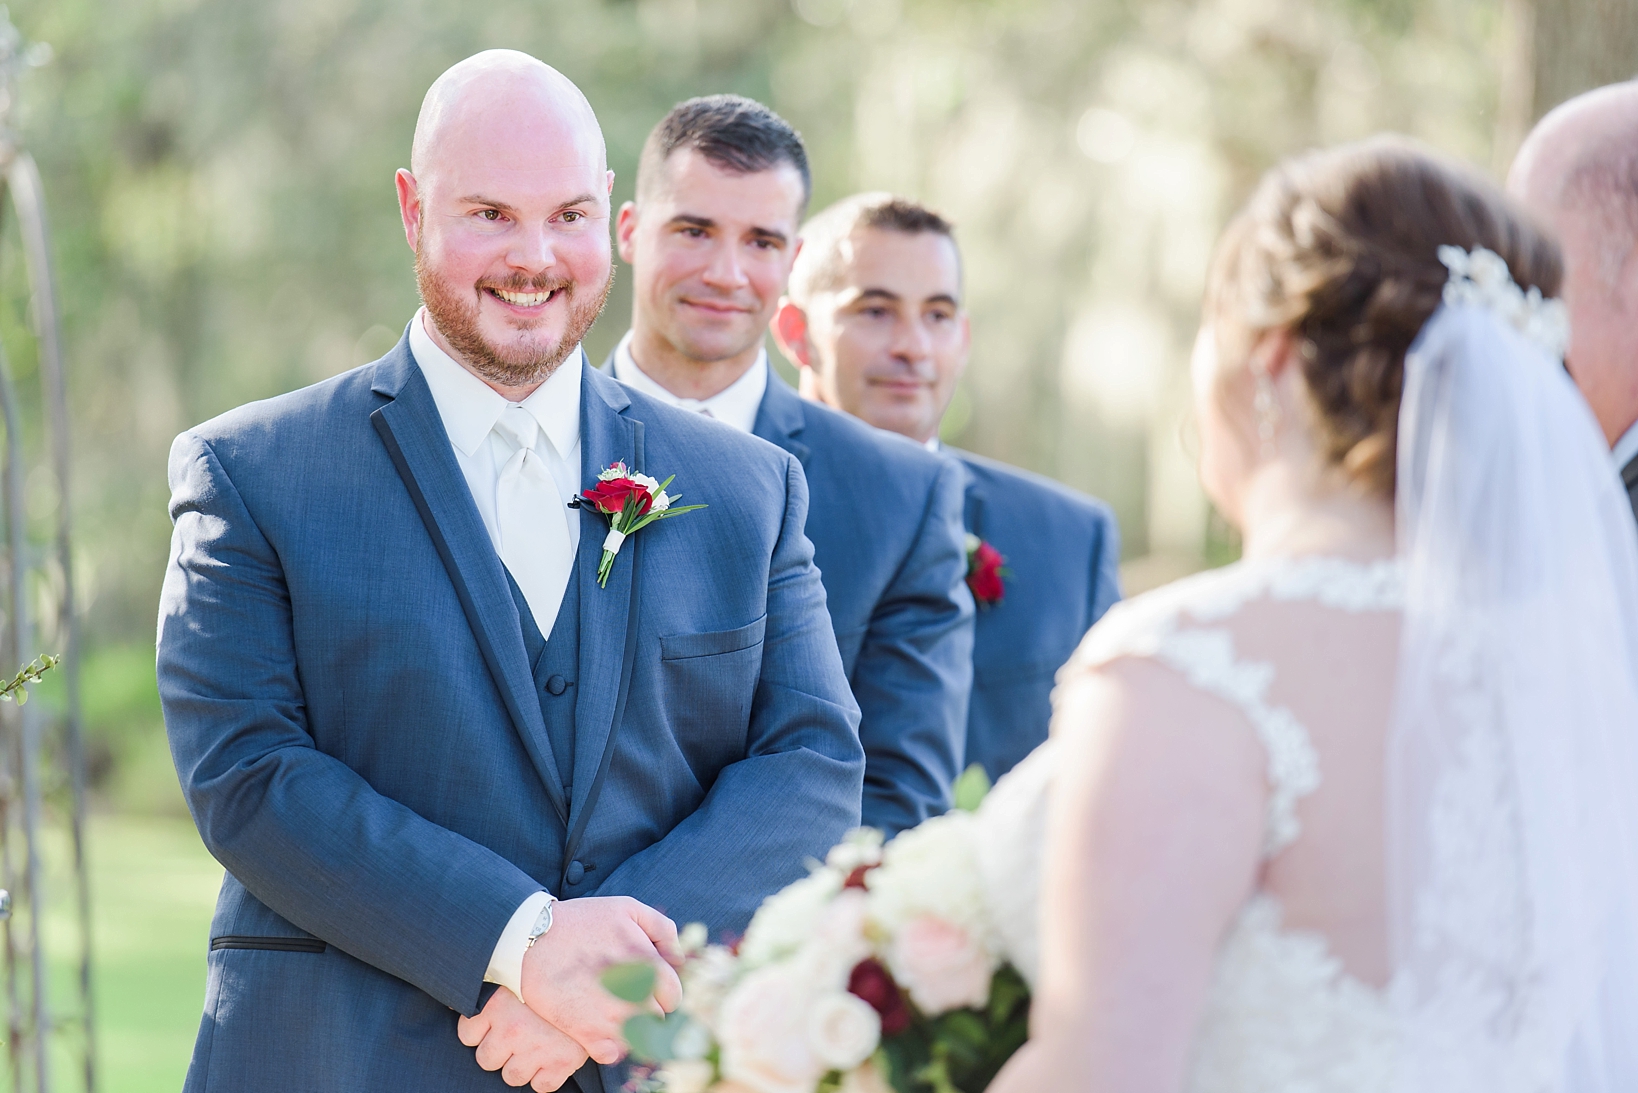 Groom smiling at his bride as she makes her way down the aisle